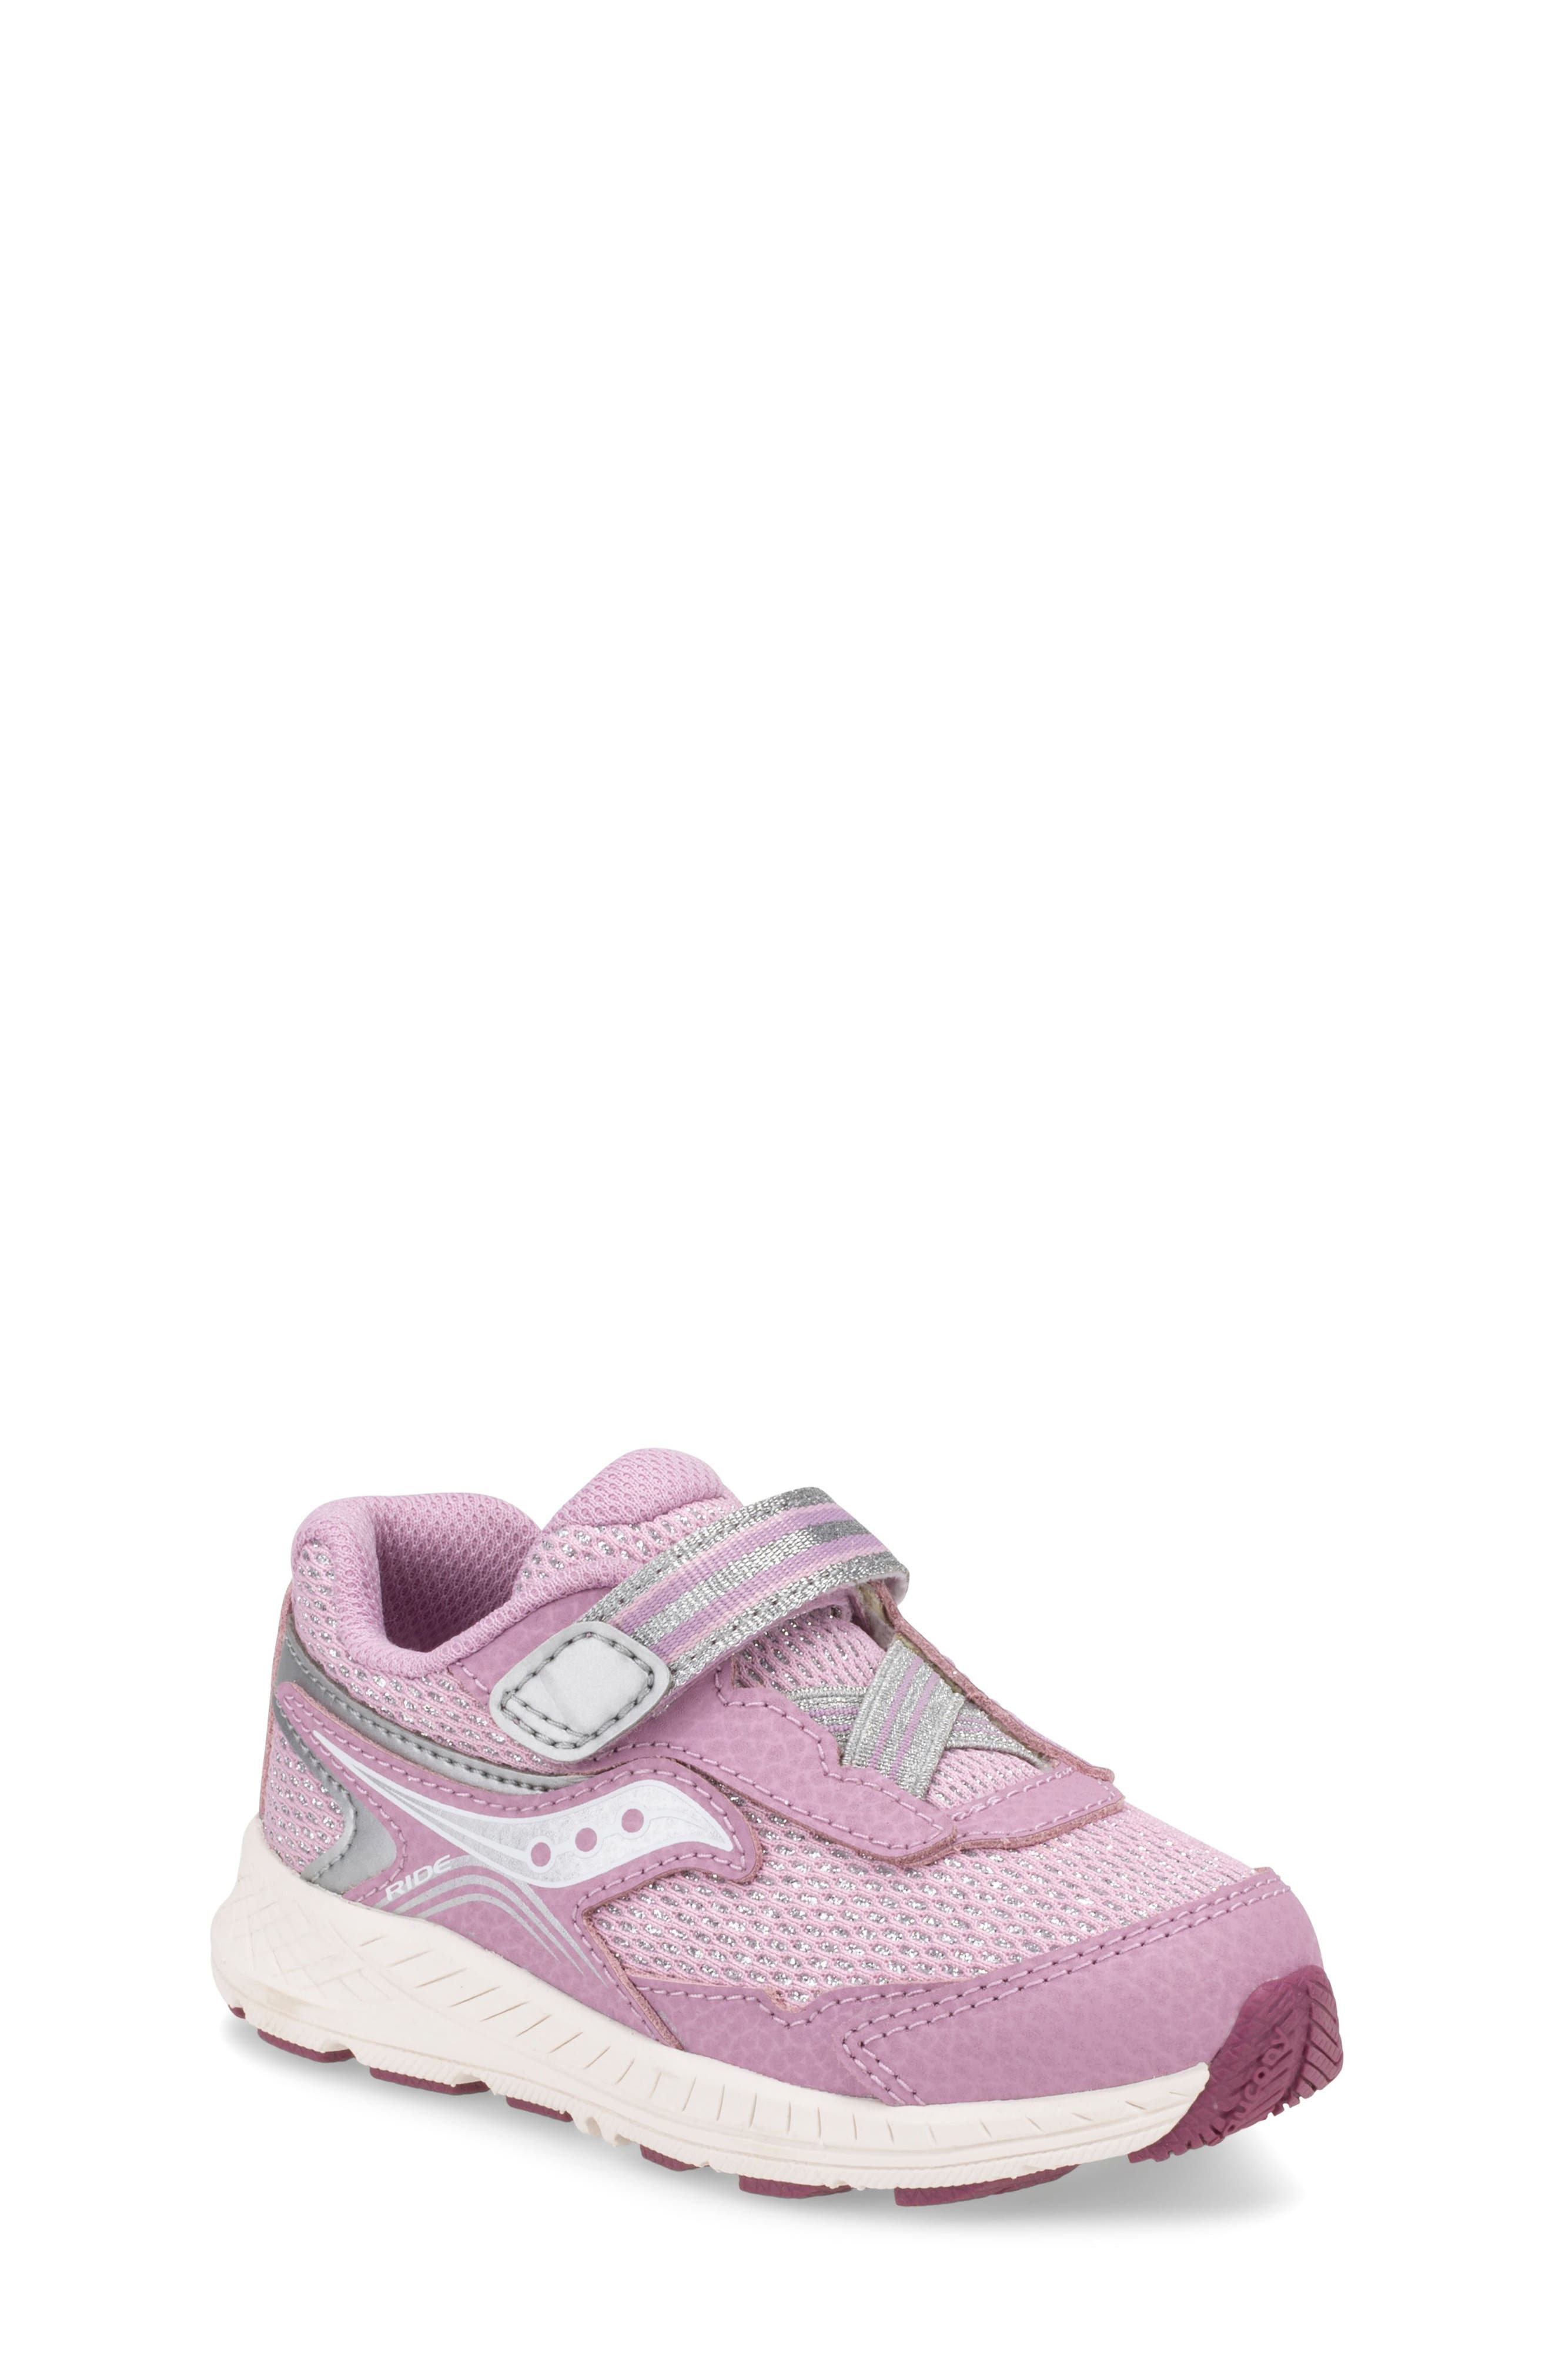 nordstrom baby walking shoes